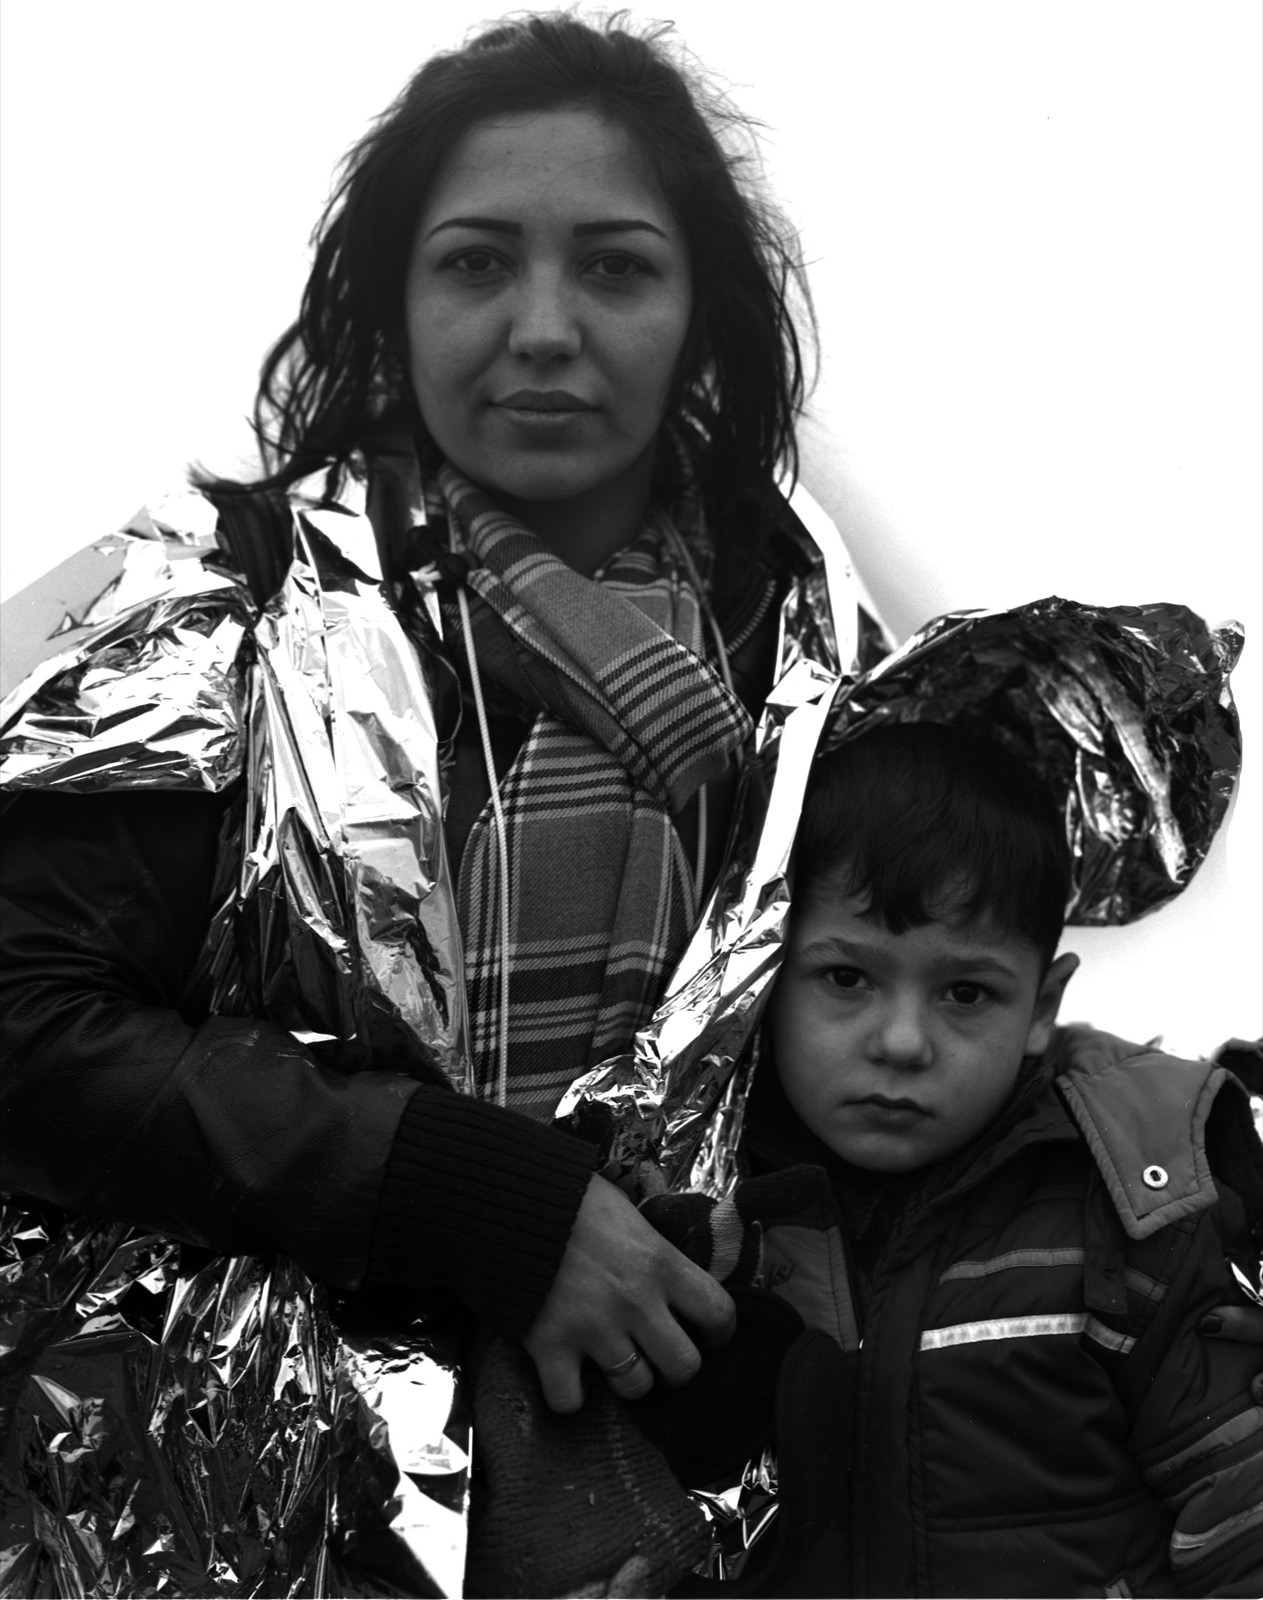  Birifan Osman and her son from Syria as they arrive on the island of Lesbos, Greece.   